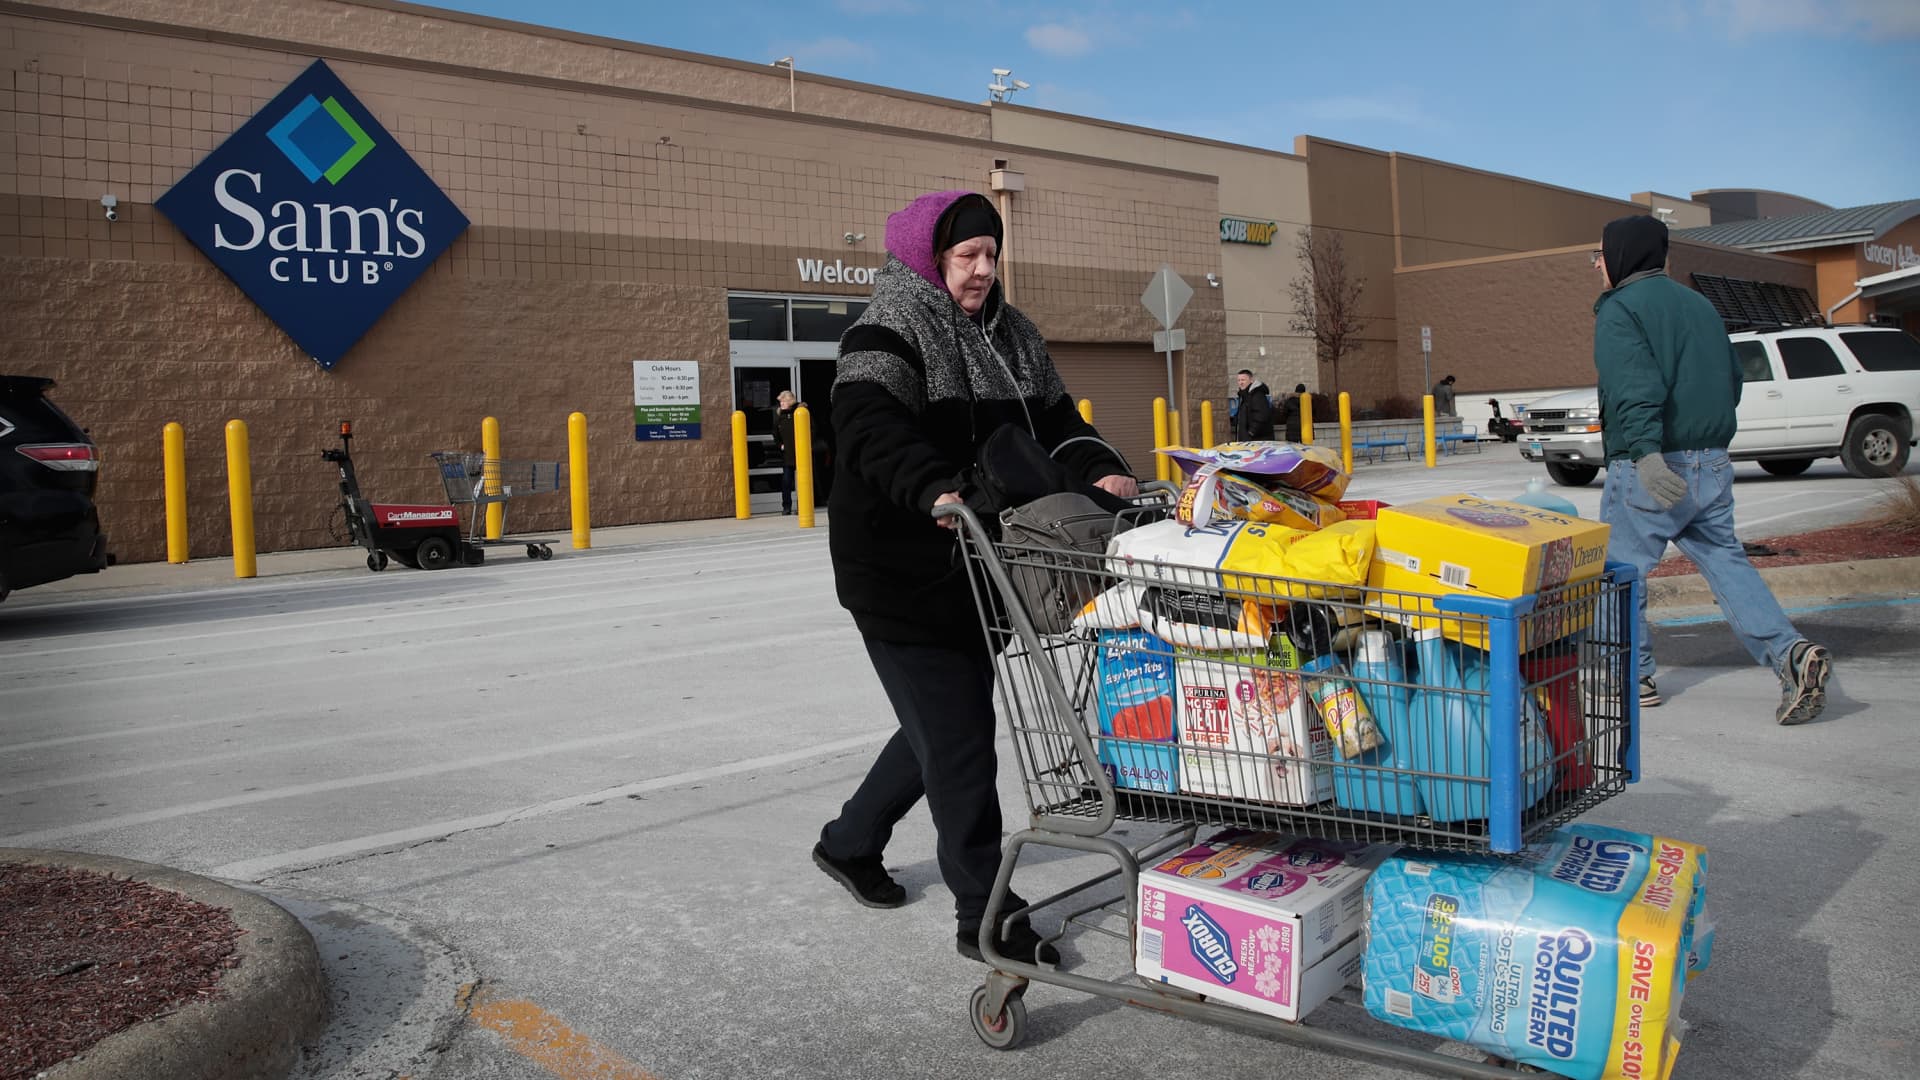 Walmart-owned Sam’s Club plans to open about 30 new stores over next five years